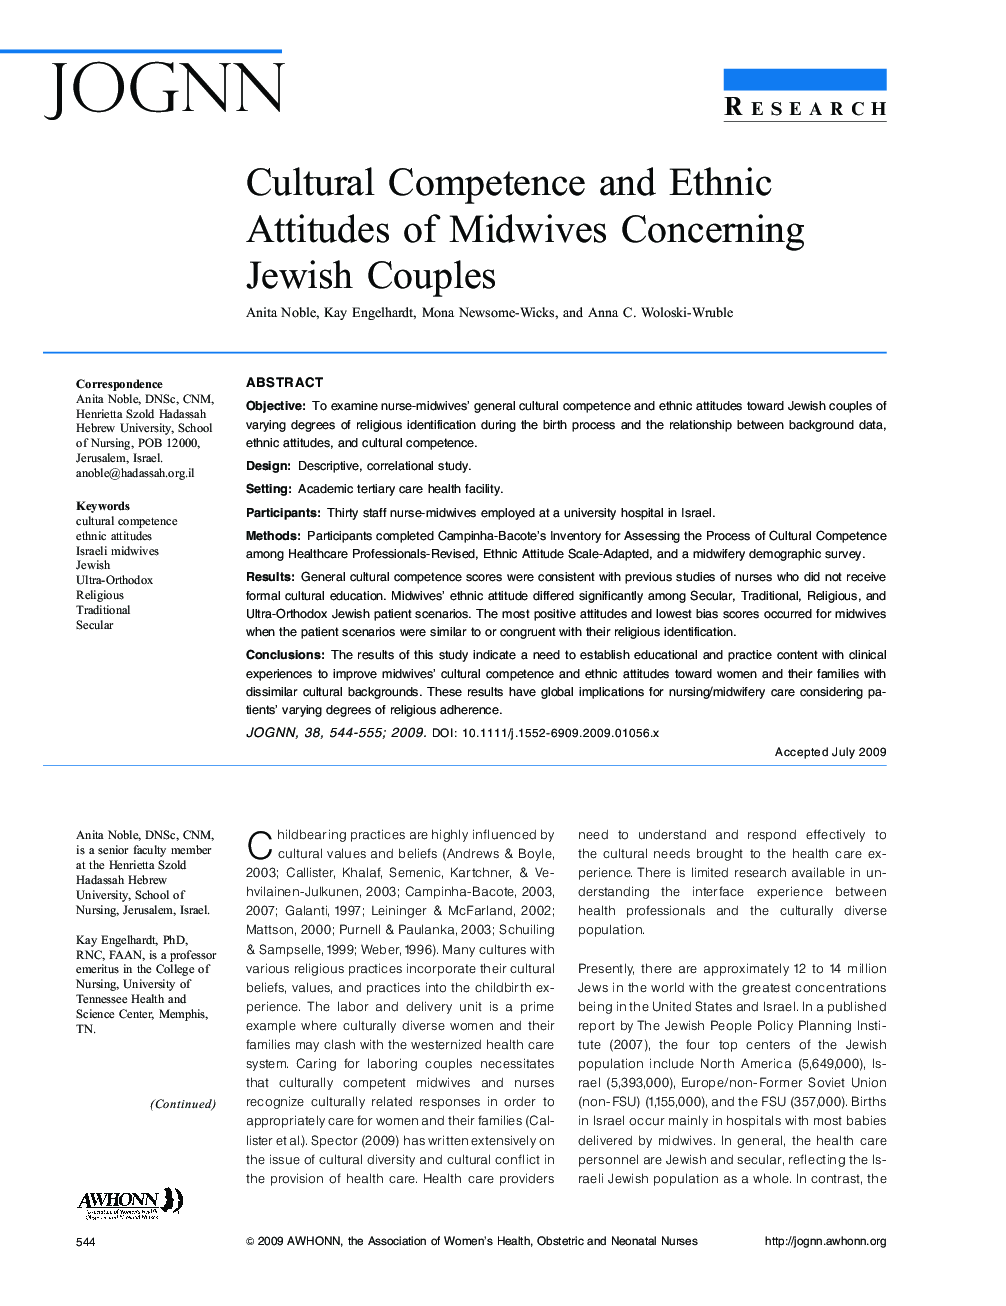 Cultural Competence and Ethnic Attitudes of Midwives Concerning Jewish Couples